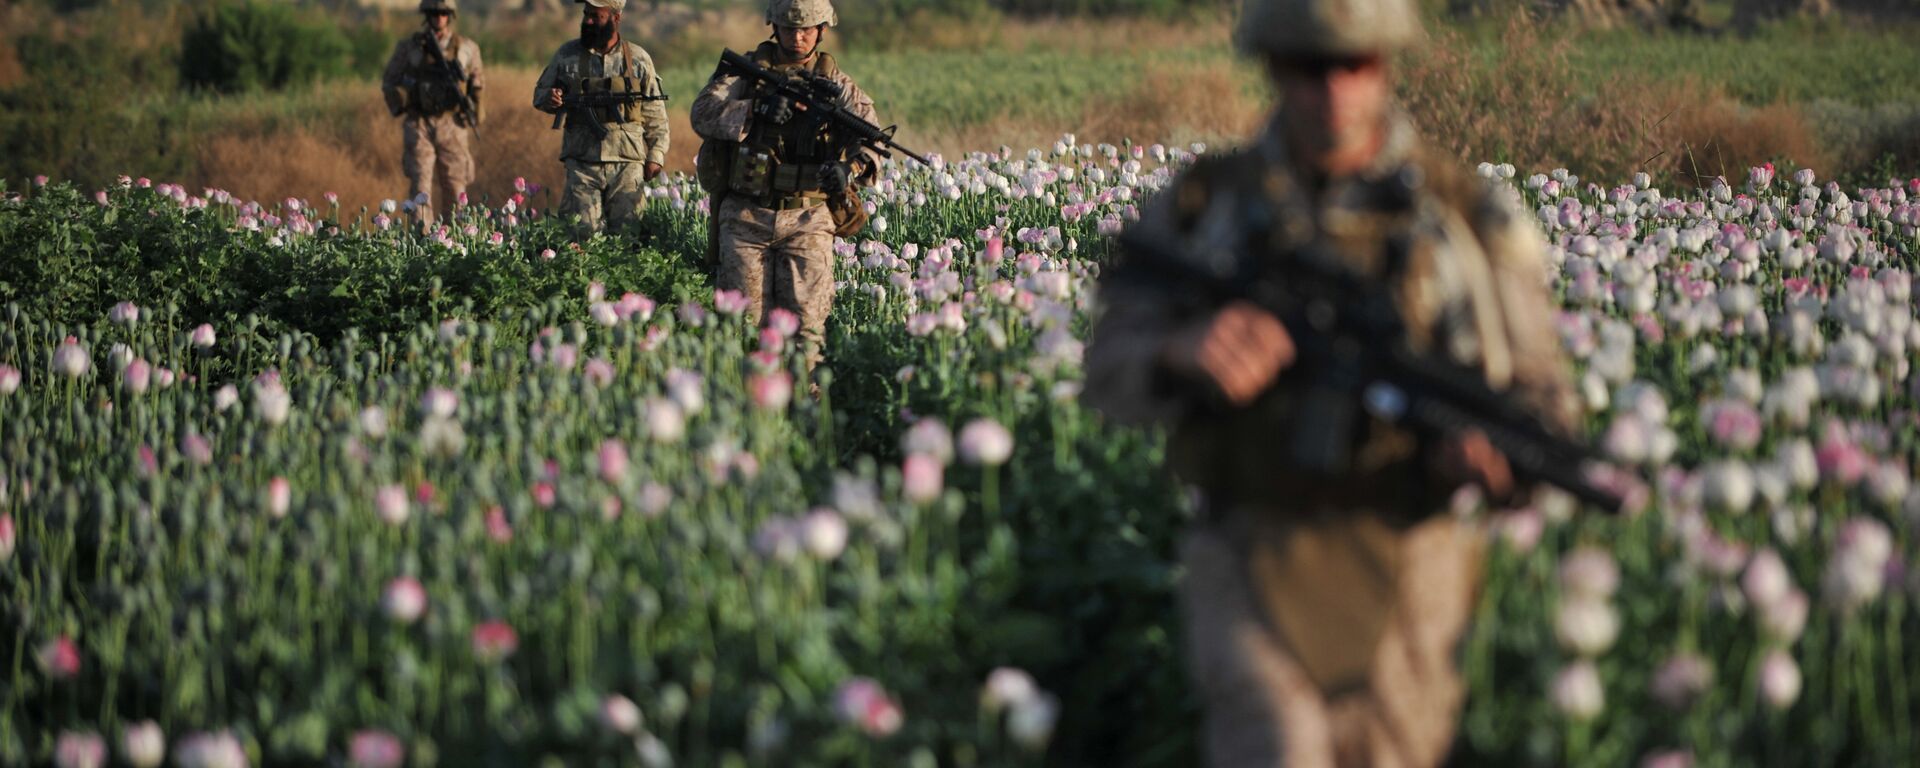 US Marines and Gunnary Sergeant Nate Cosby (R), Staff Sergeant Josh Lacey (2nd R) and Navy Hospitalman 2 Daniel Holmberg (L) from Border Adviser Team (BAT) and Explosive Ordance Disposal (EOD) 1st and 2nd Marine Division (Forward) walk through opium poppy field at Maranjan village in Helmand province on April 25, 2011 as they take patrol with their team and Afghanistan National Police. - Sputnik International, 1920, 24.08.2020